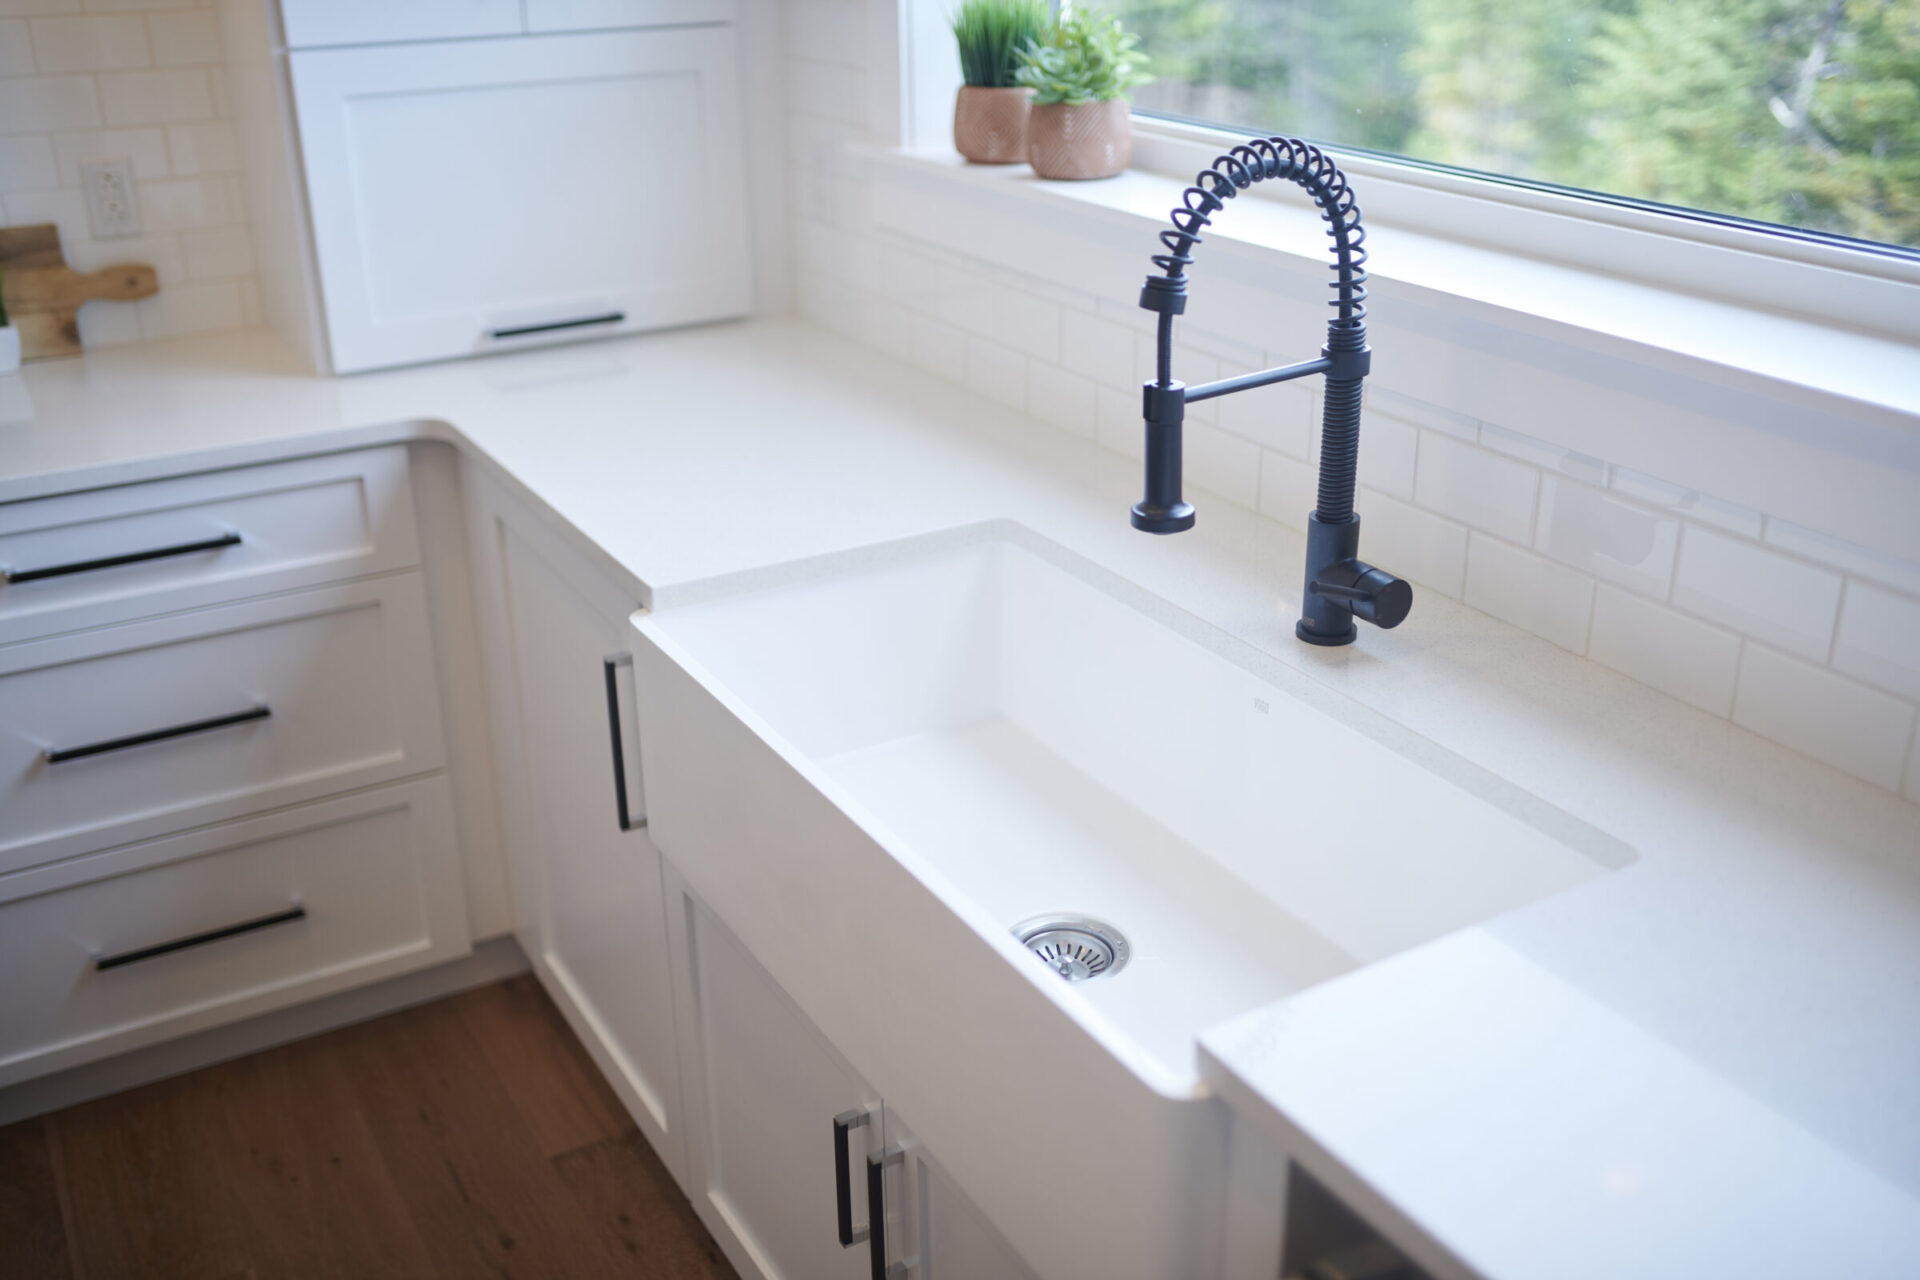 The image shows a modern kitchen corner with a white countertop, a large undermount sink, a black spring faucet, white cabinetry, and a green plant by the window.